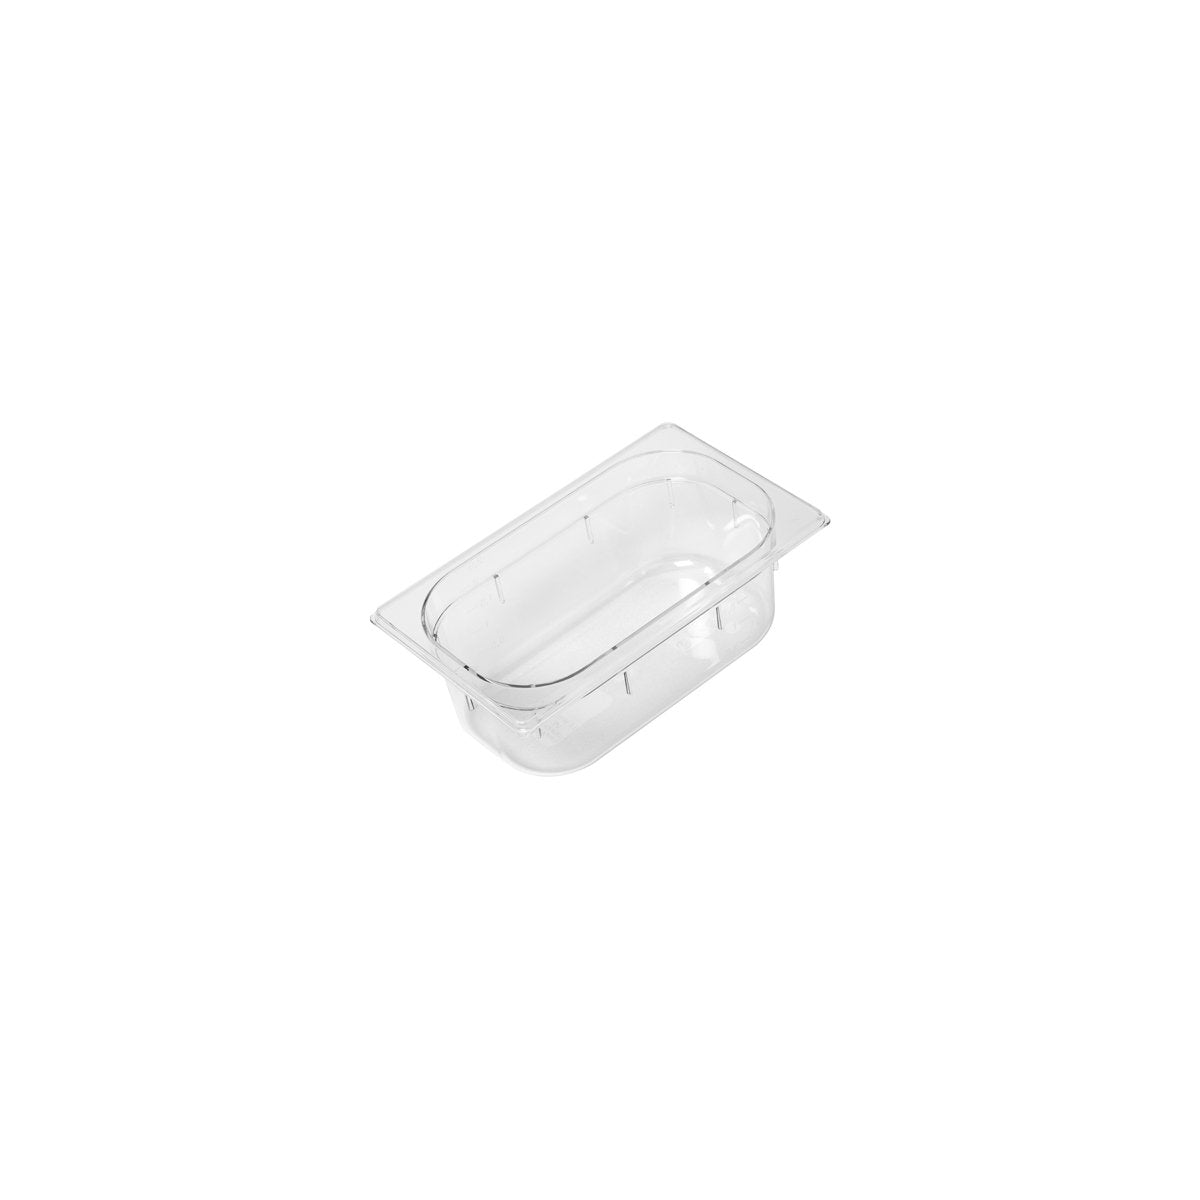 PC-14100CL Inox Macel Gastronorm Pan Polycarbonate Clear 1/4 Size 100mm Tomkin Australia Hospitality Supplies